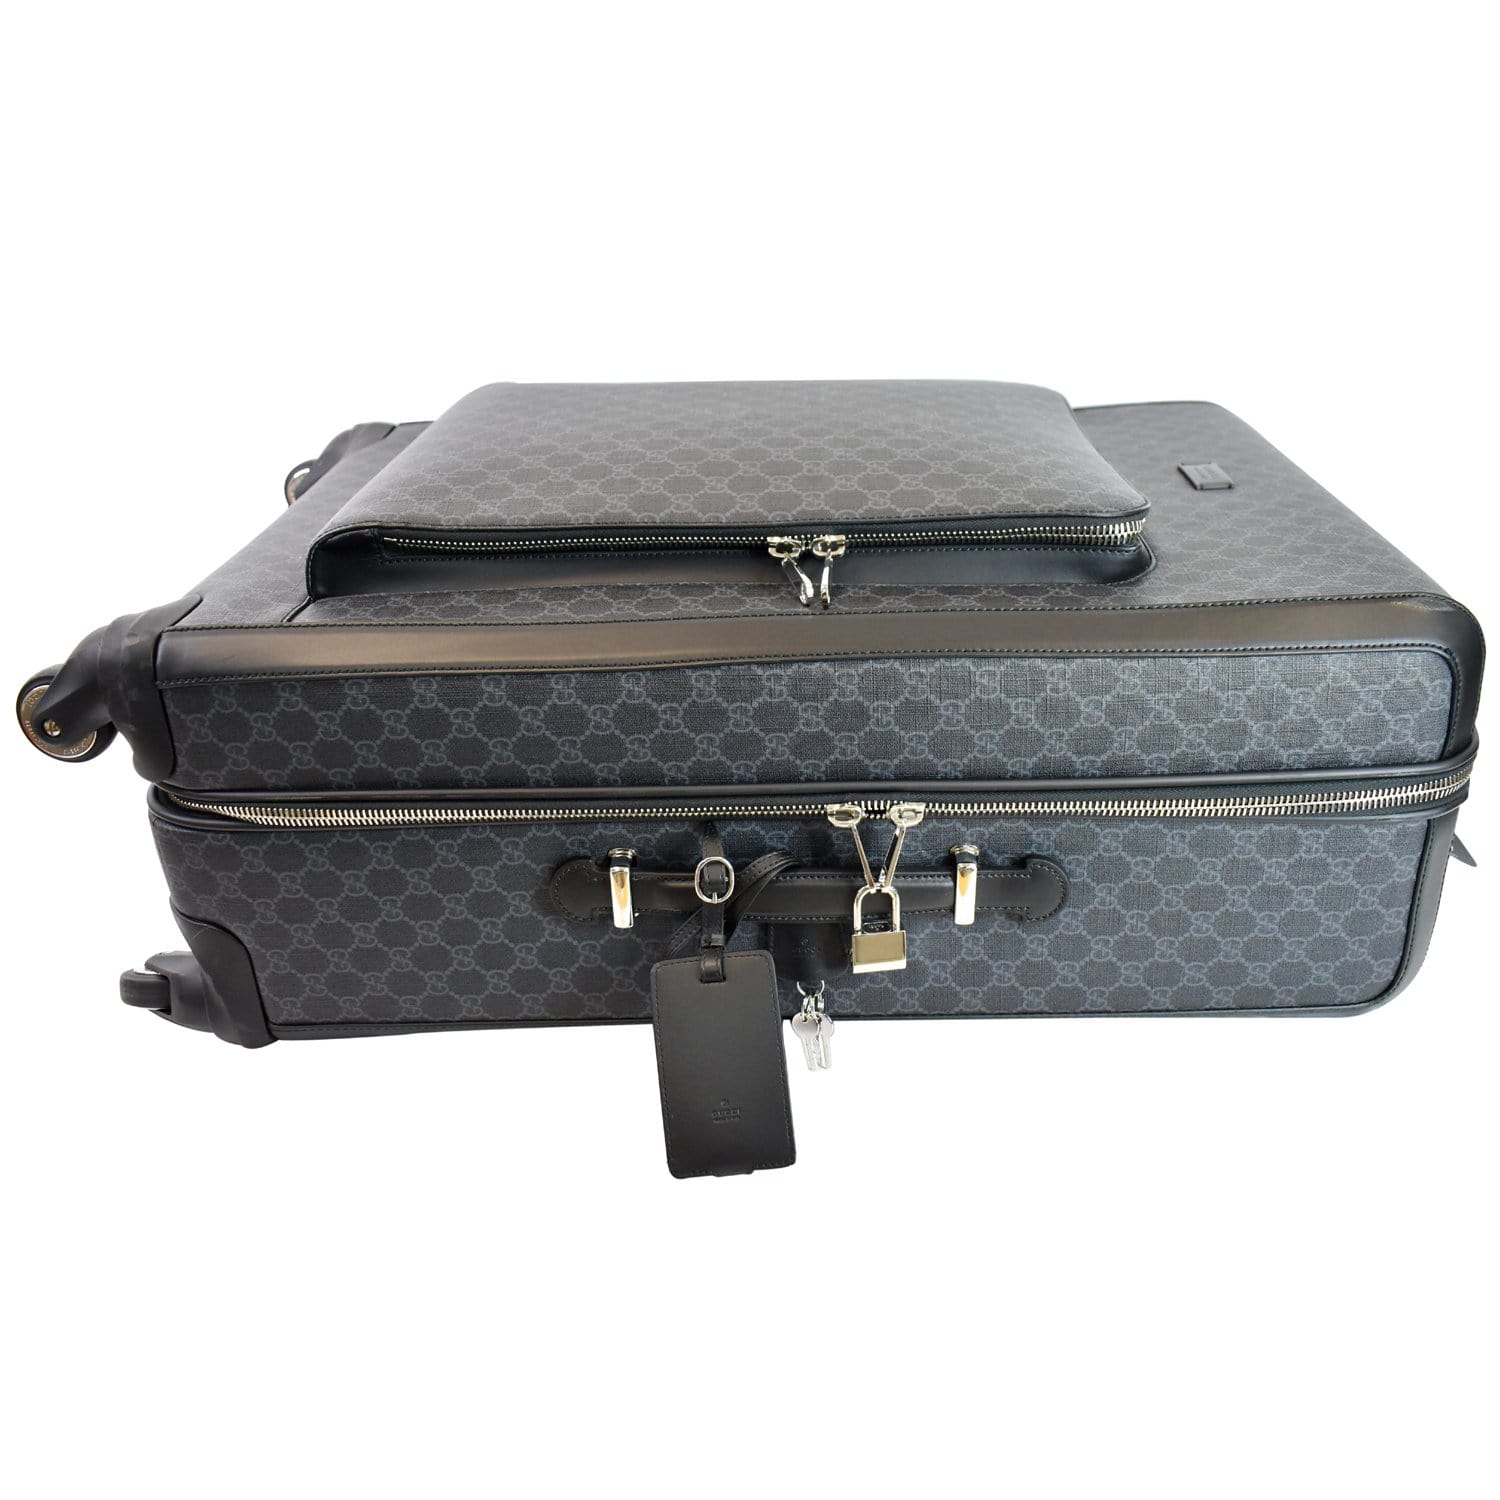 Gorgeous Gucci GG Supreme carry-on bag. Heavy duty roller wheels. #afflink